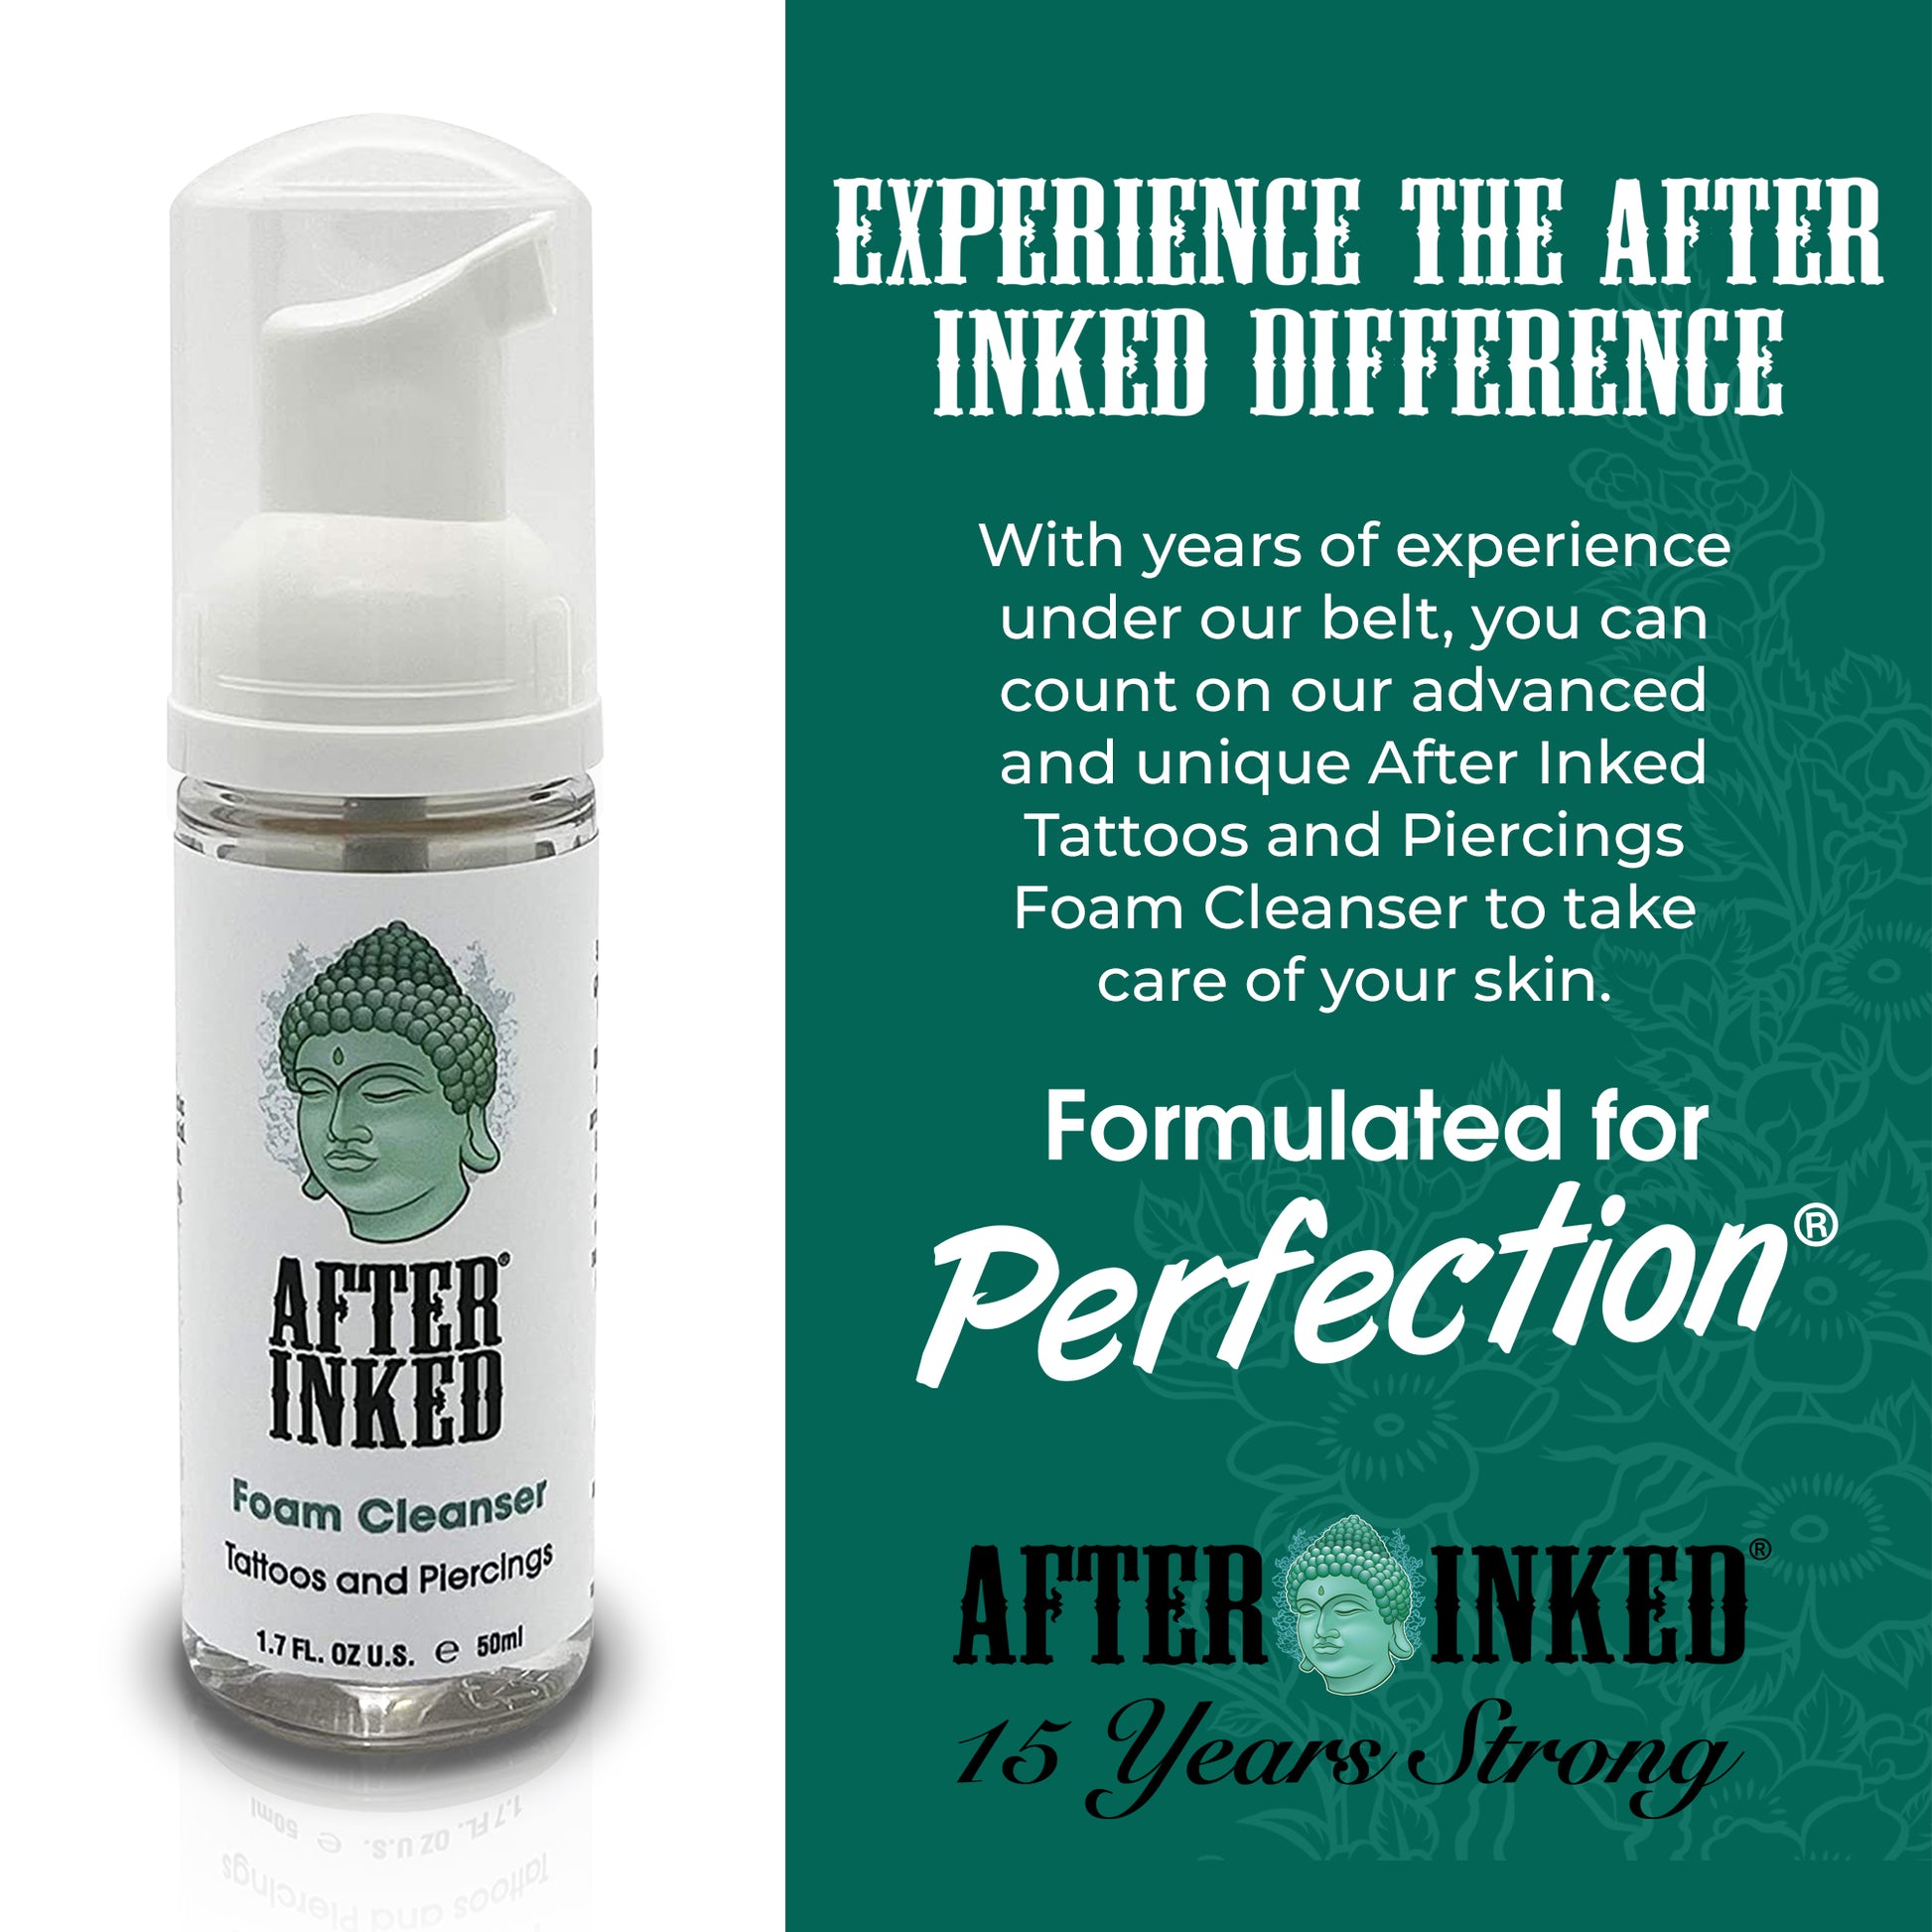 Experience the After Inked difference. With years of experience under our belt, you can count on our advanced and unique After Inked Tattoos and Piercings Foam Cleanser to take care of your skin.